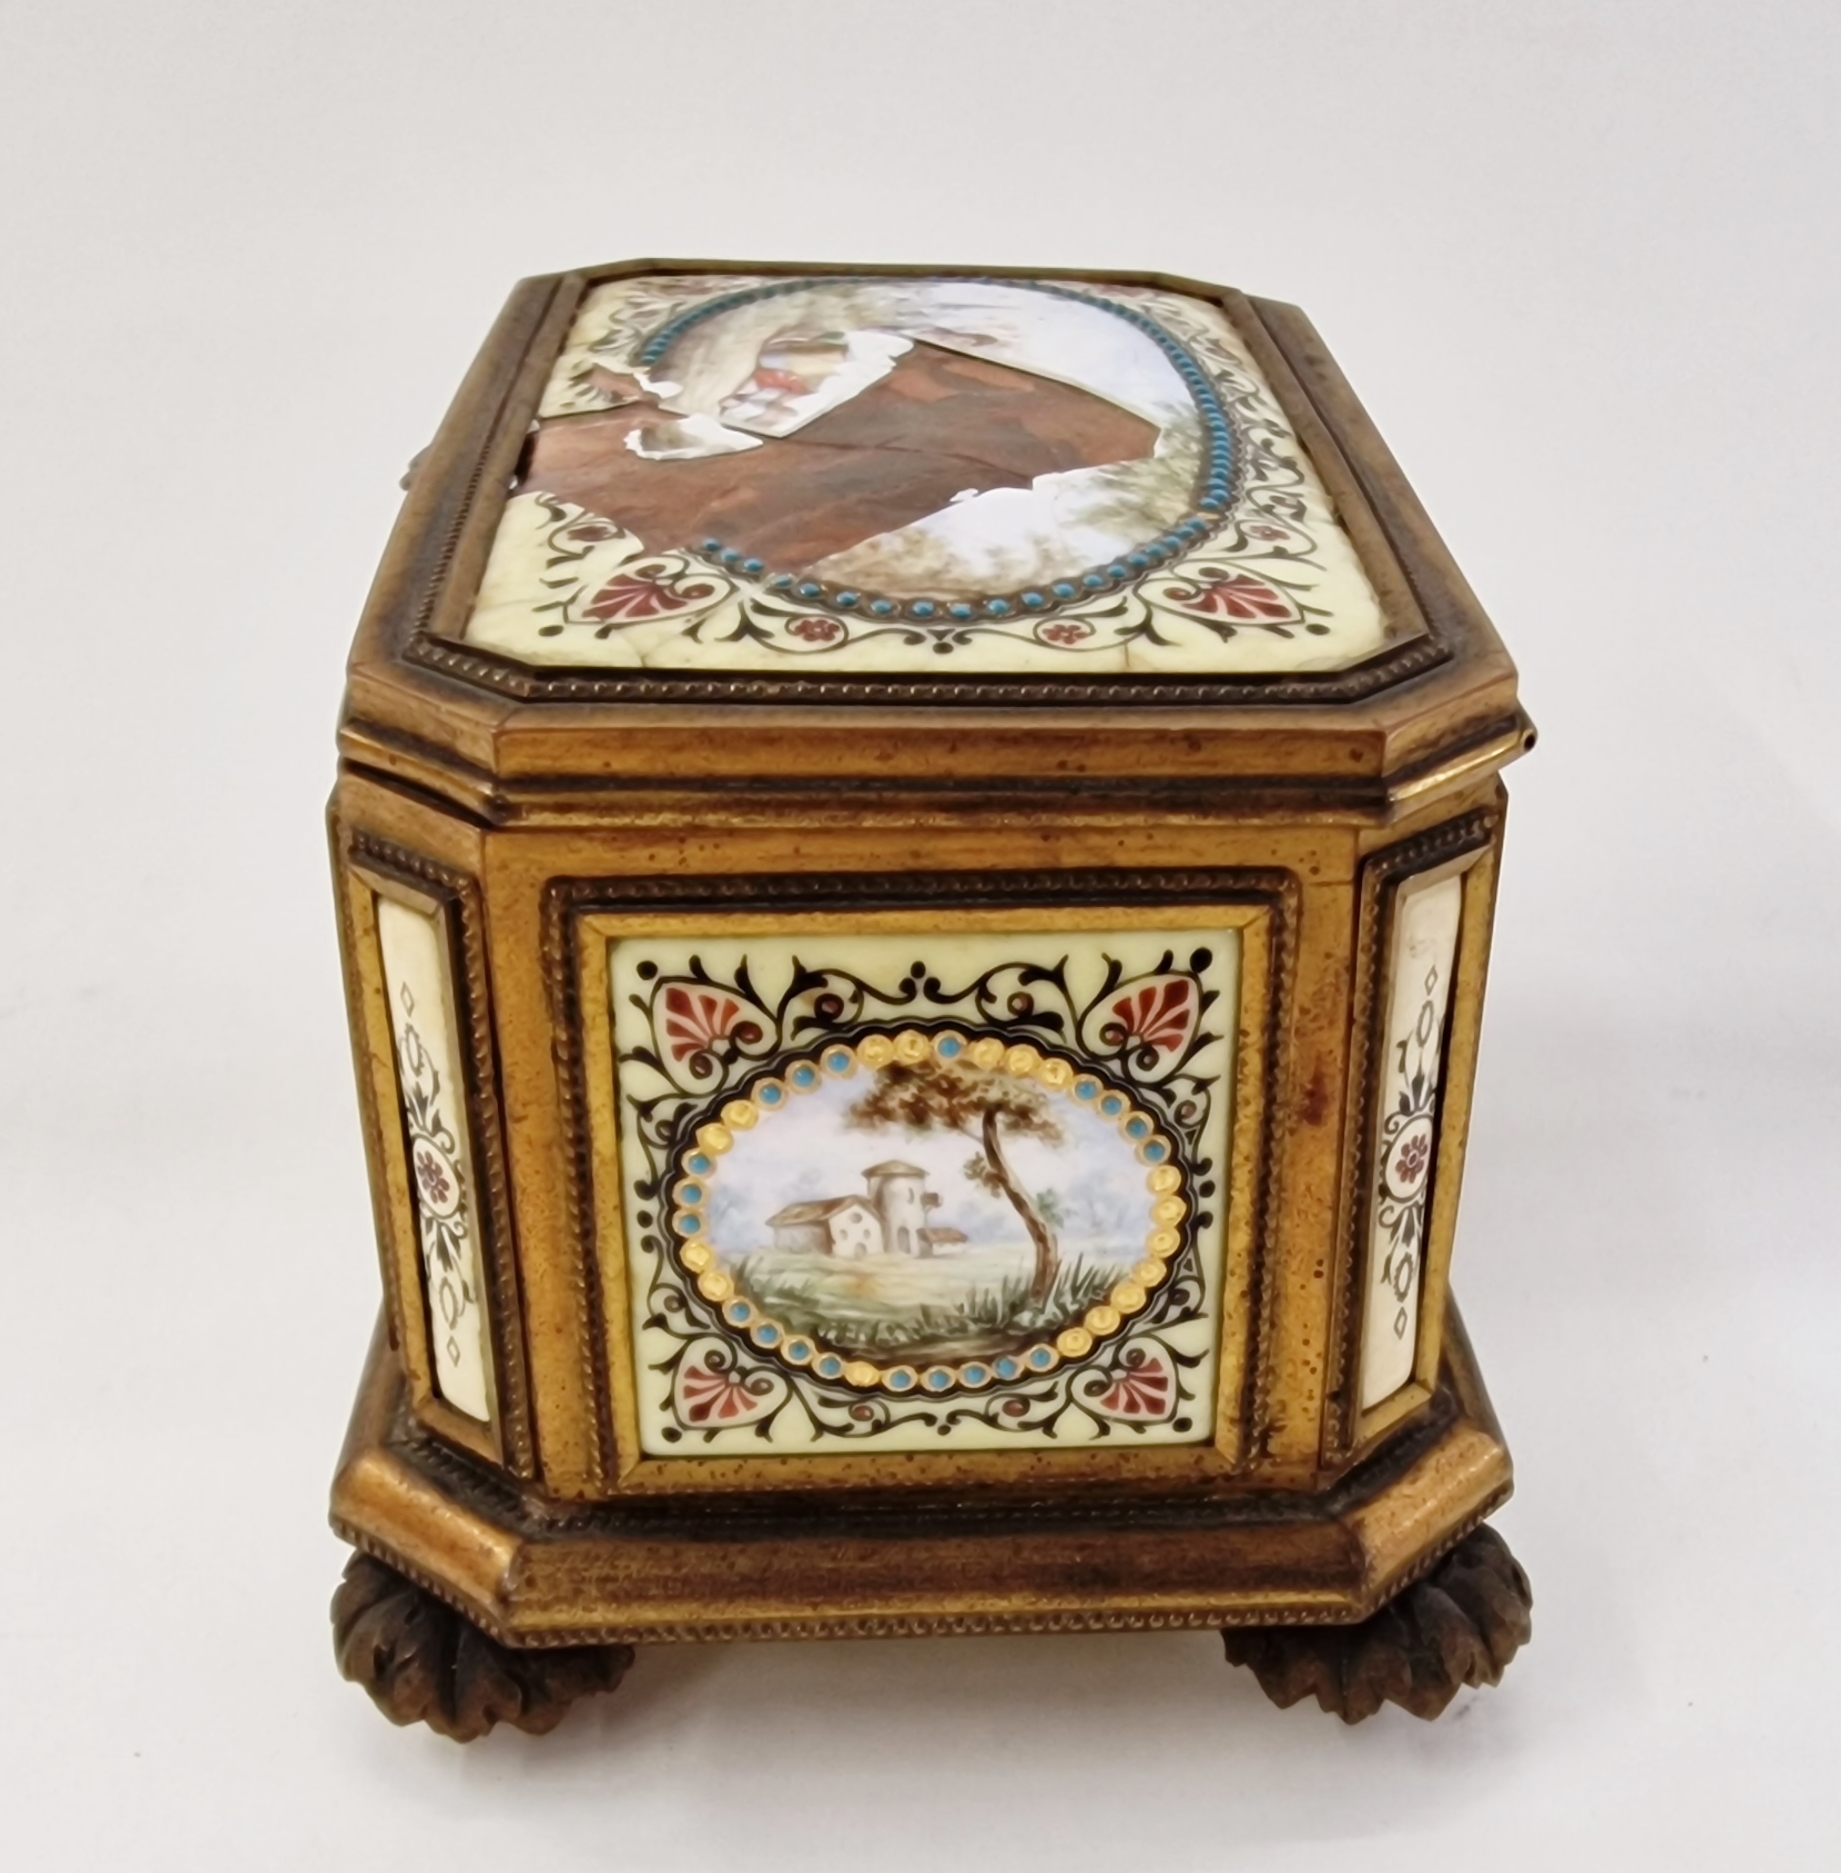 Late 19th century French enamel and gilt metal-mounted jewellery casket, of canted rectangular - Image 4 of 8